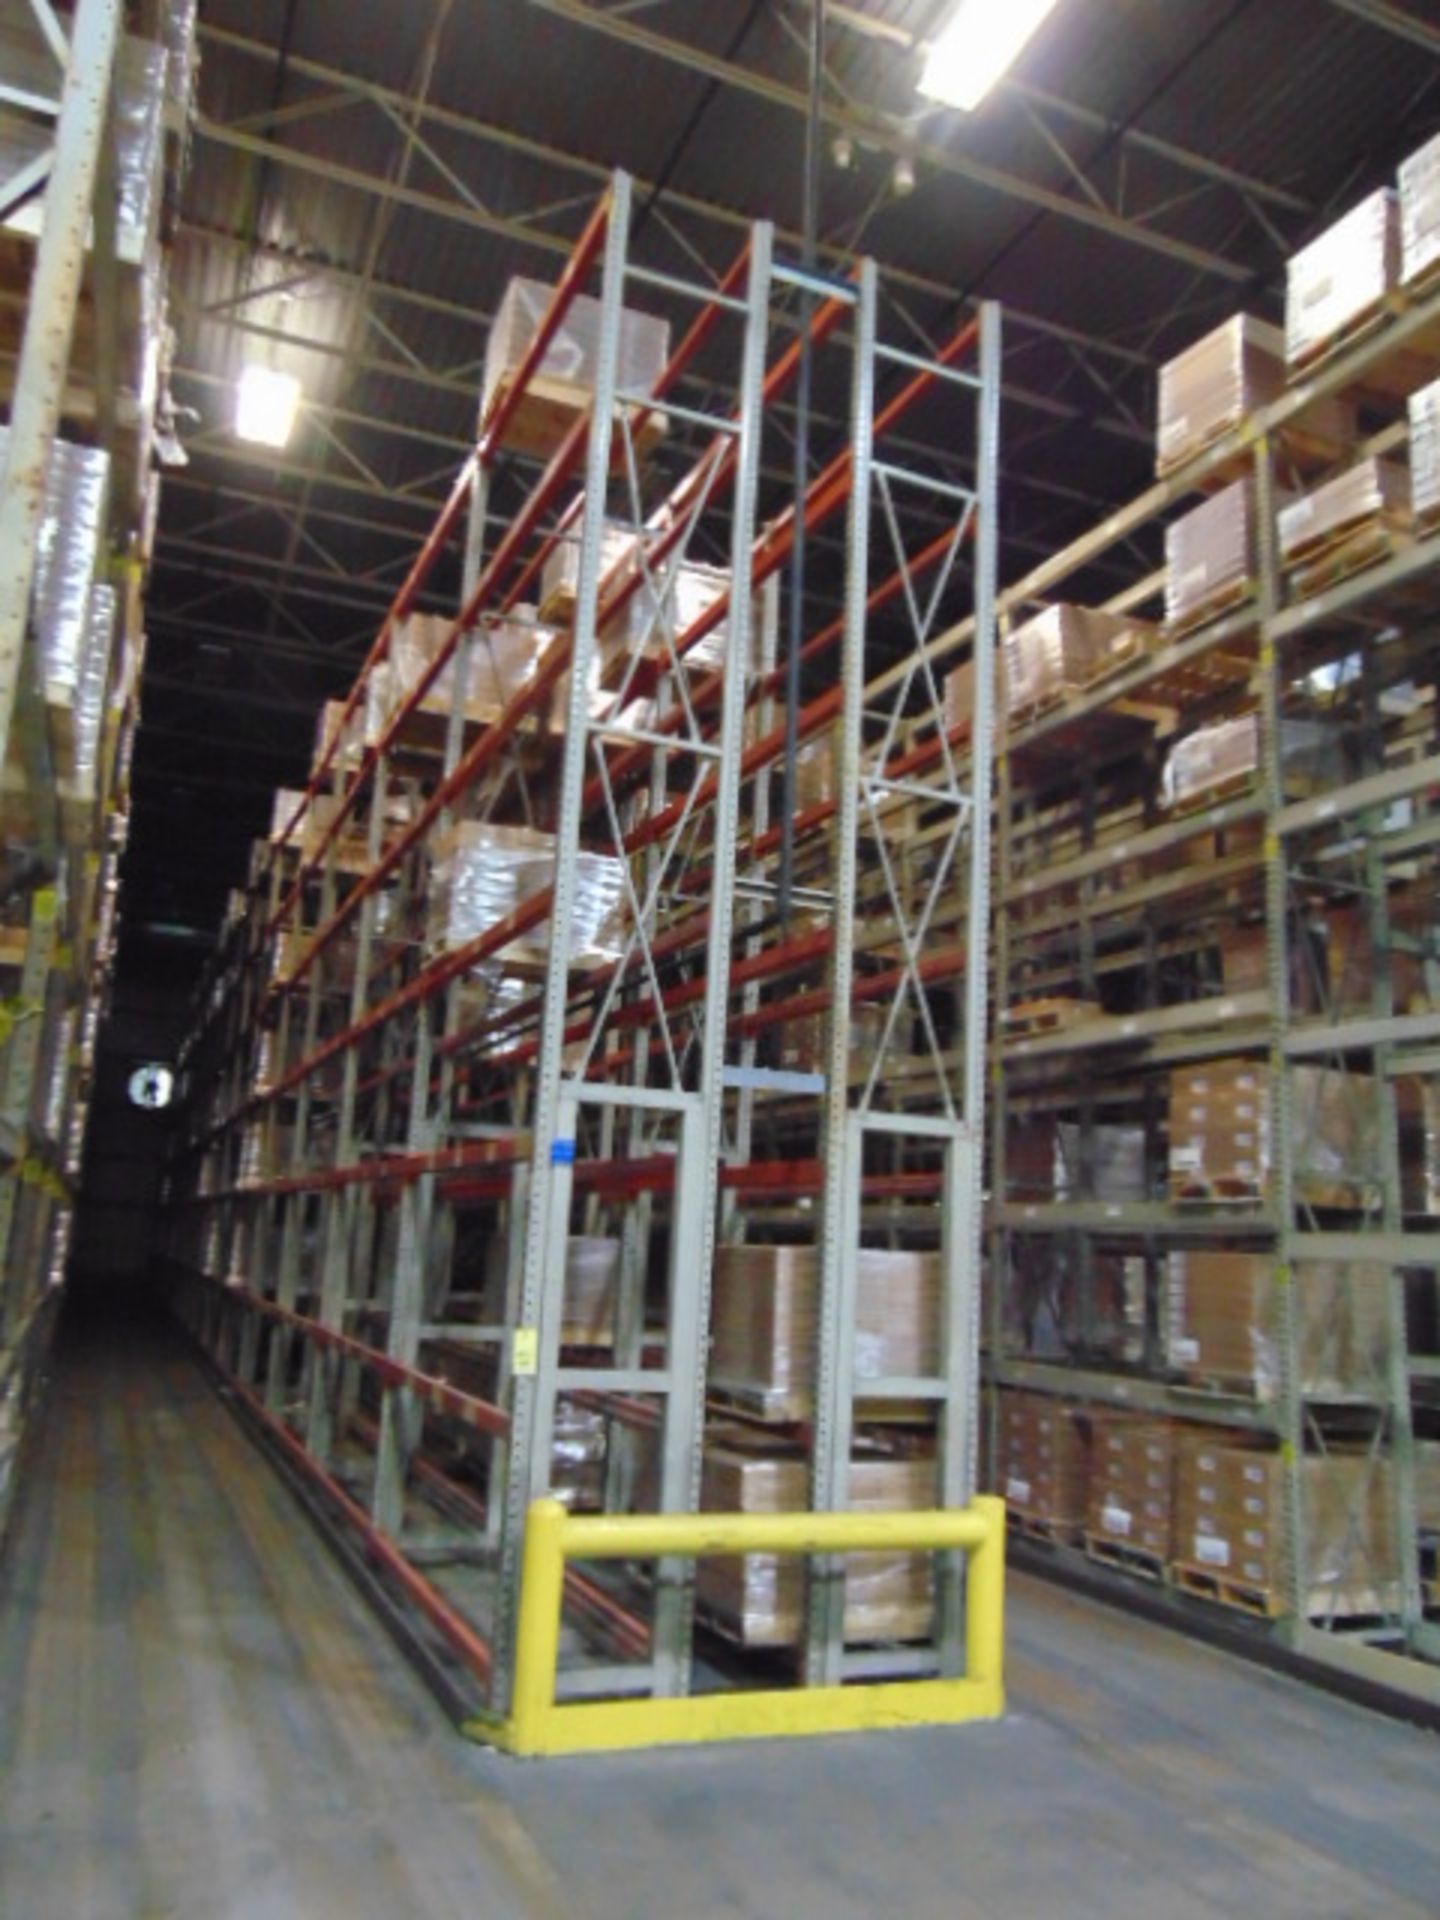 LOT OF TEARDROP PALLET RACKING SECTIONS (30), 8'W. x 30"dp. x 25'ht. 6' tier(Shipping area) (Delayed